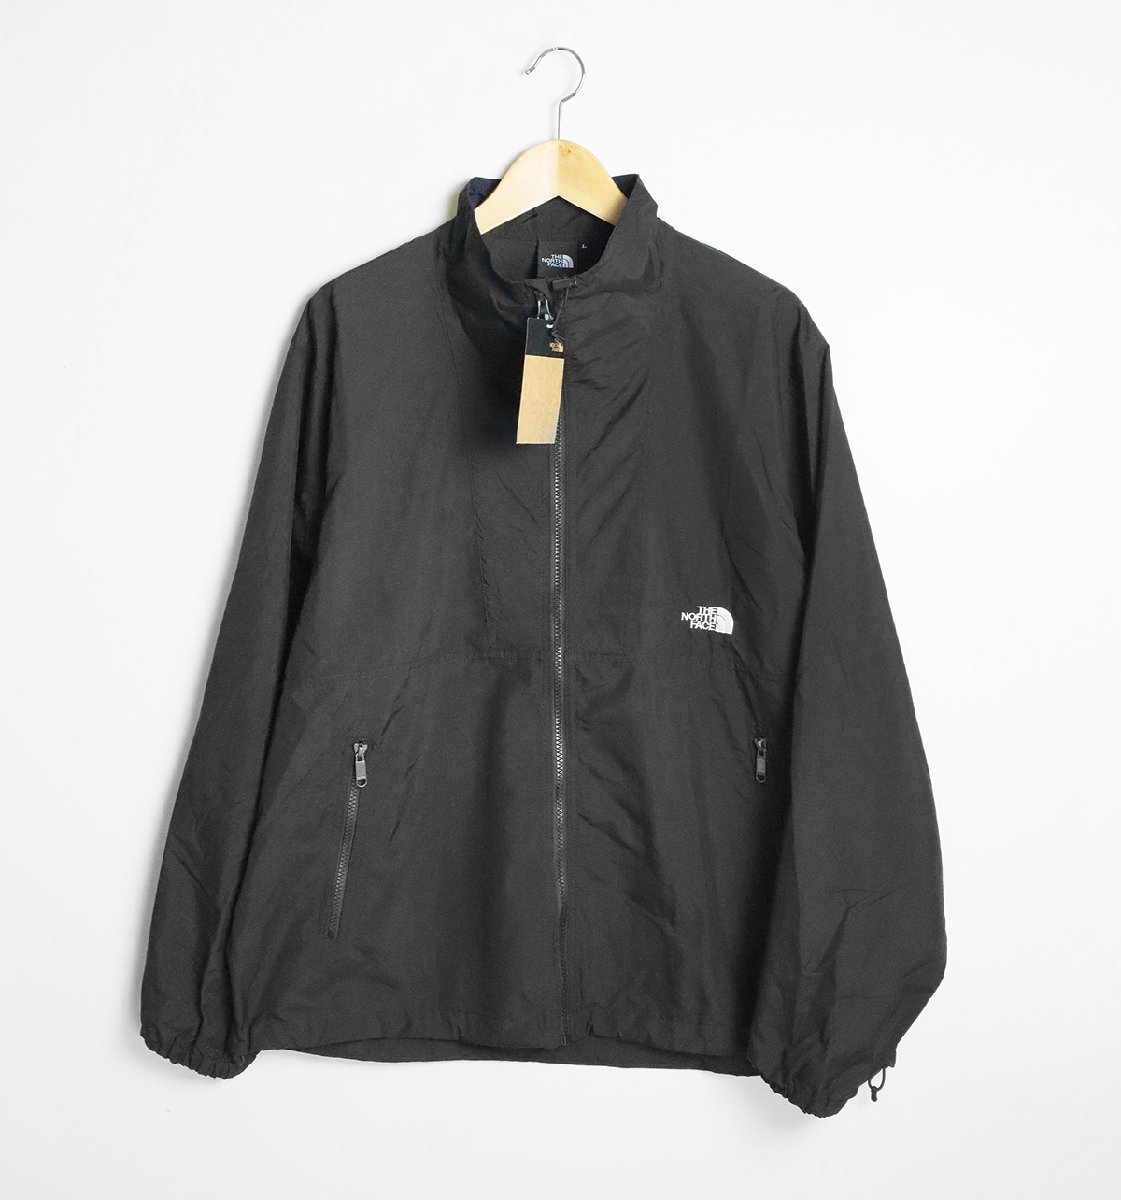 THE NORTH FACE ◆Compact Blouson 黒 L コンパクトブルゾン NP22334R 軽量 ノースフェイス 収納袋 下げ札付き◆BY15